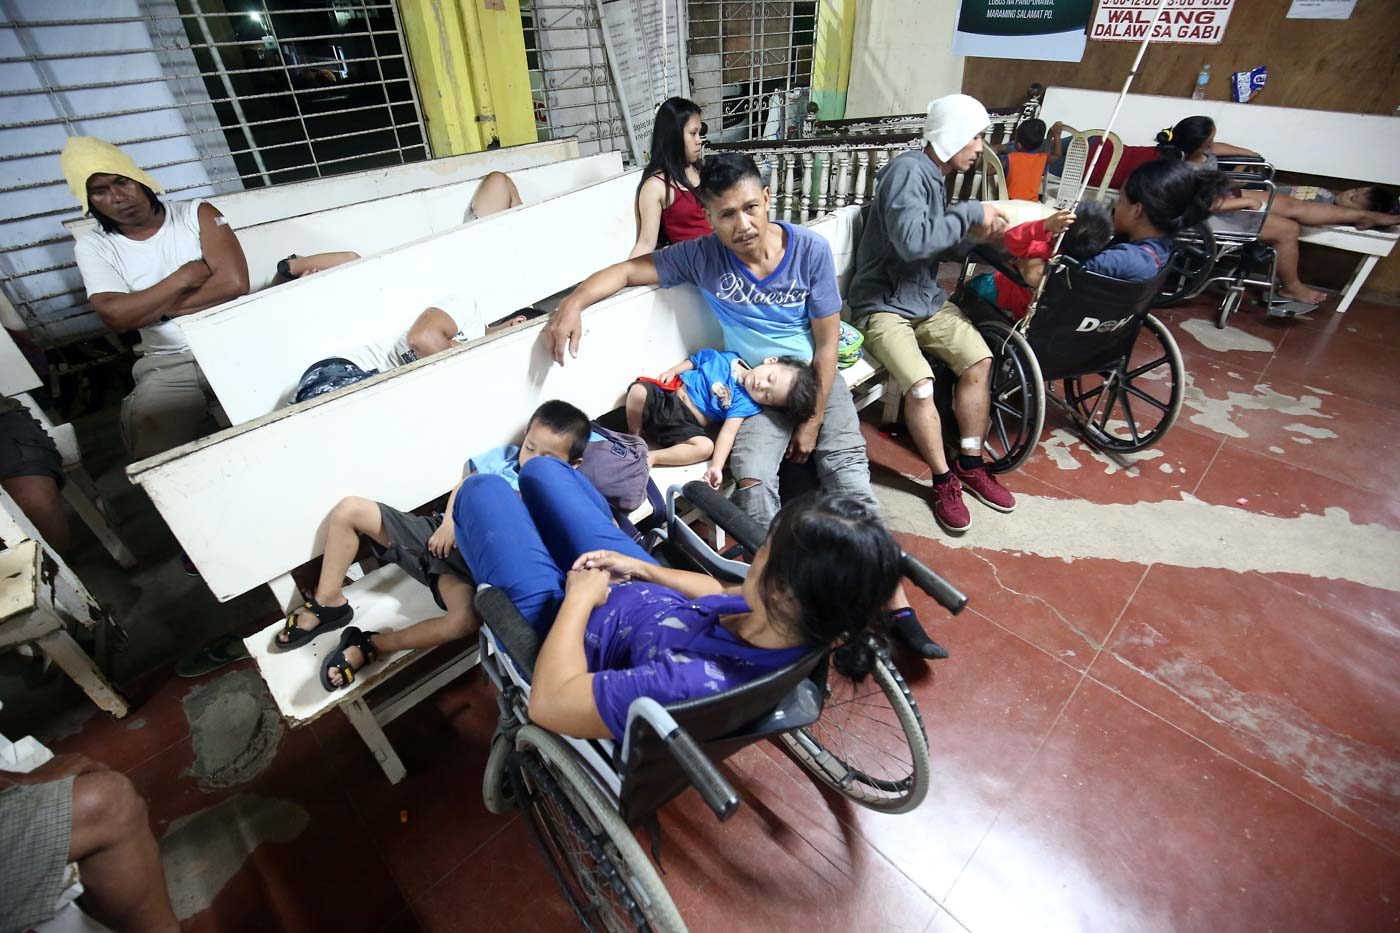 INJURED. Some of the injured passengers taken to a hospital for treatment. Photo by Ben Nabong/Rappler  